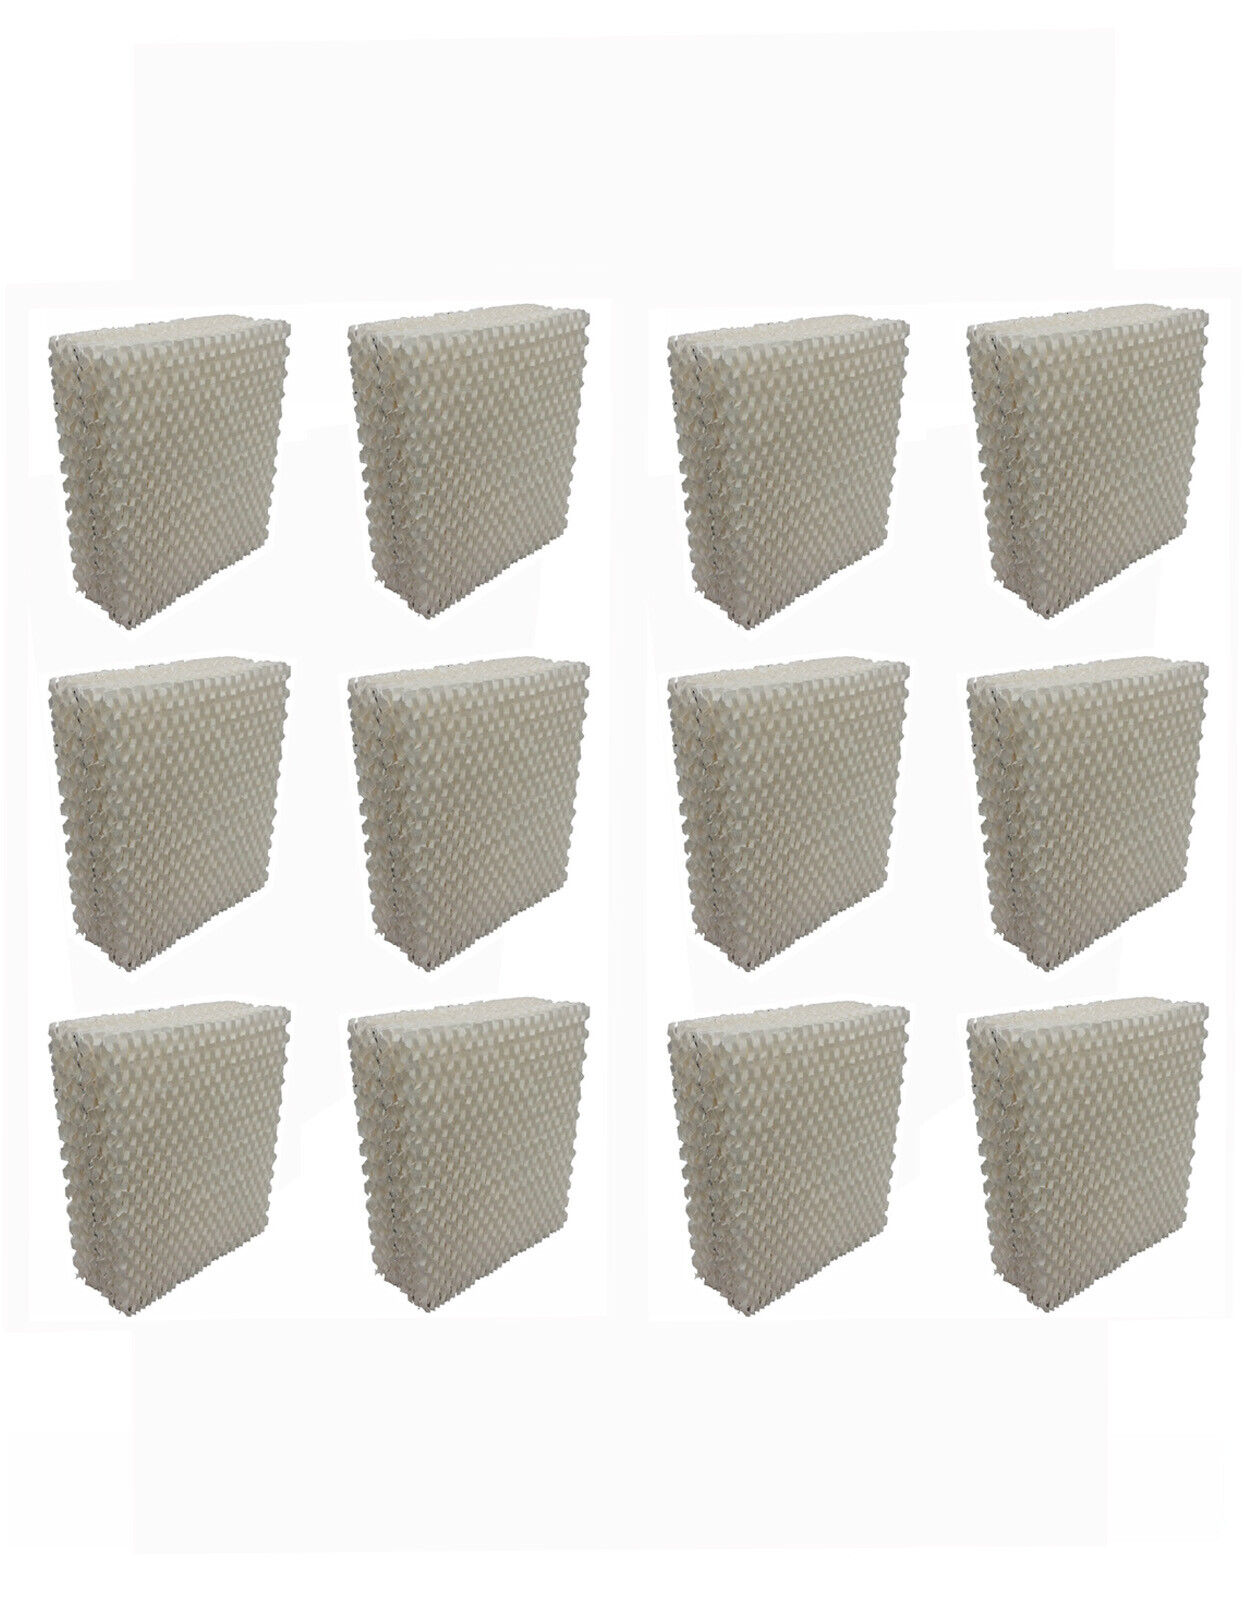 EFP Humidifier Filters for AirCare 1043 Super Bemis Essick Air 12 PACK